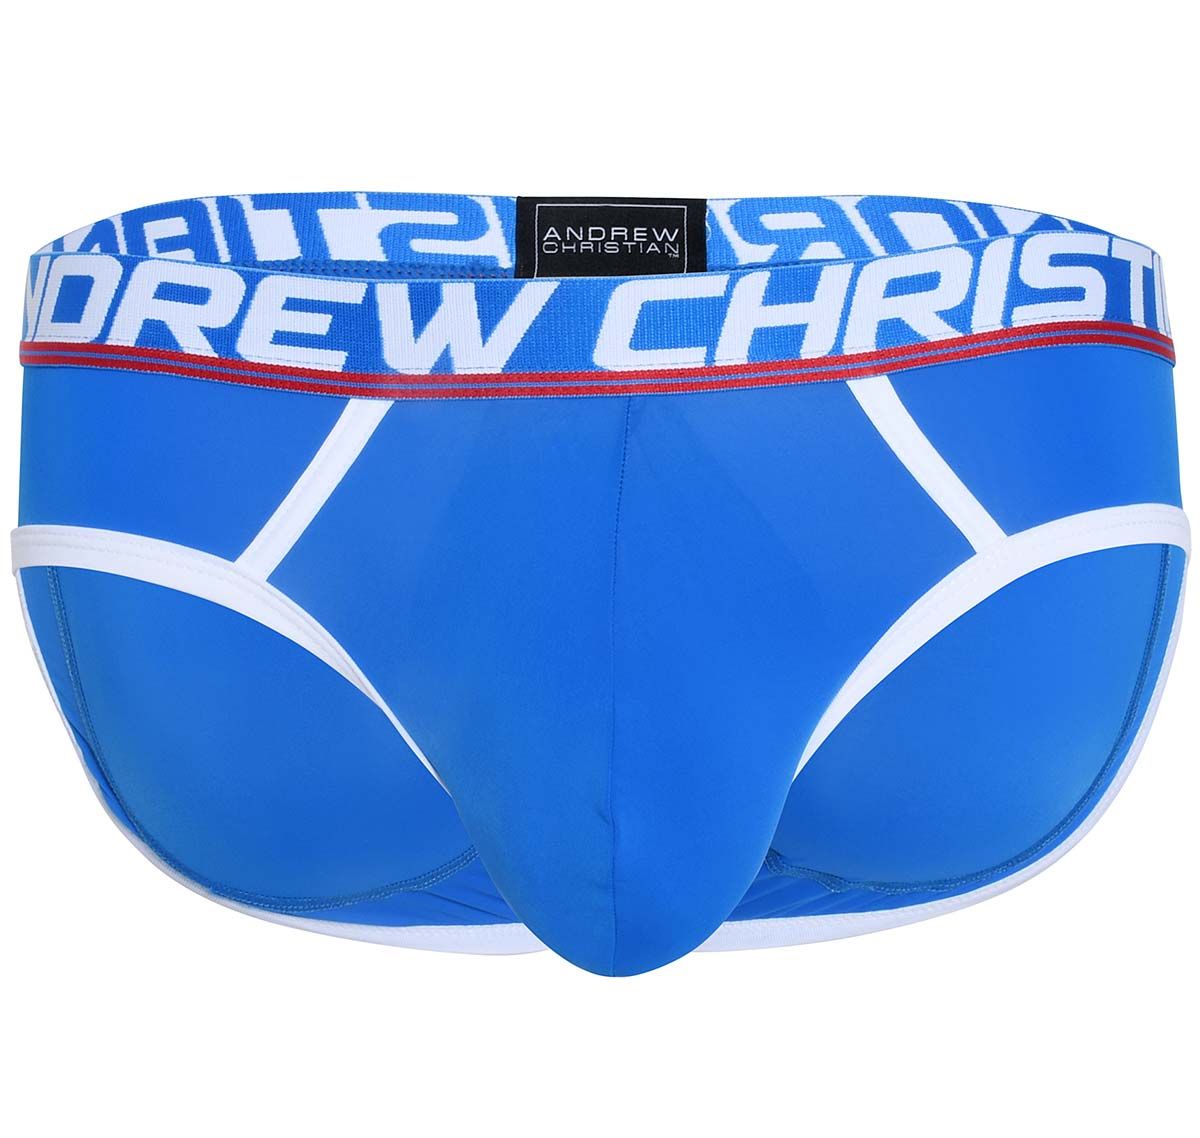 Andrew Christian Slip ACTIVE SHAPE BRIEF w/ Bubble Butt Shaping Pads 92325, bleu